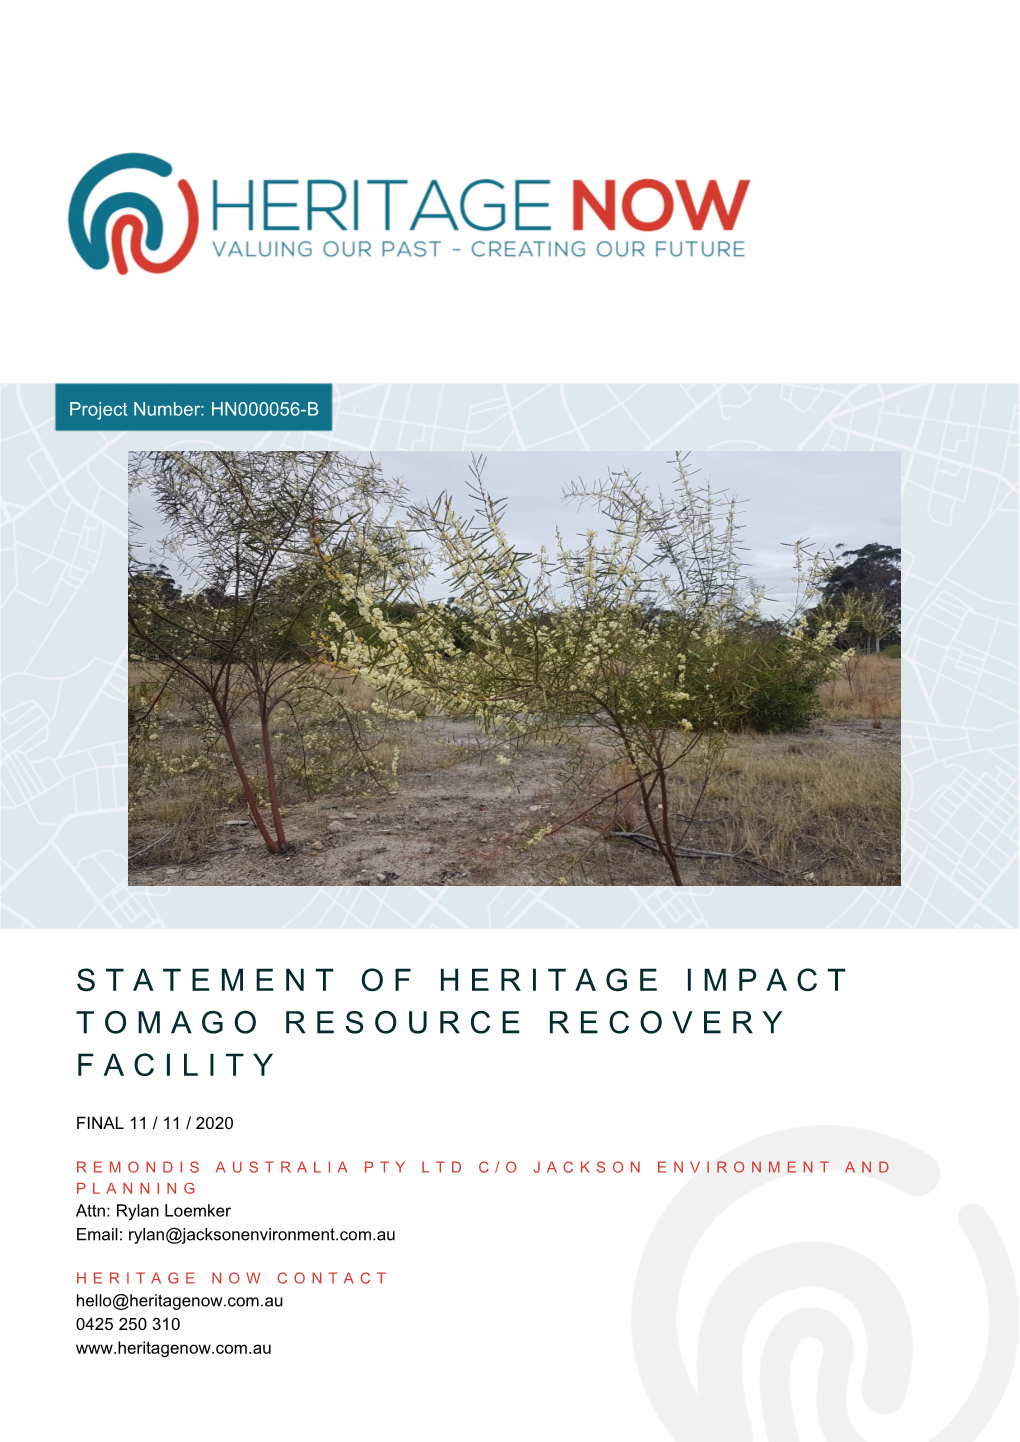 Statement of Heritage Impact Tomago Resource Recovery Facility